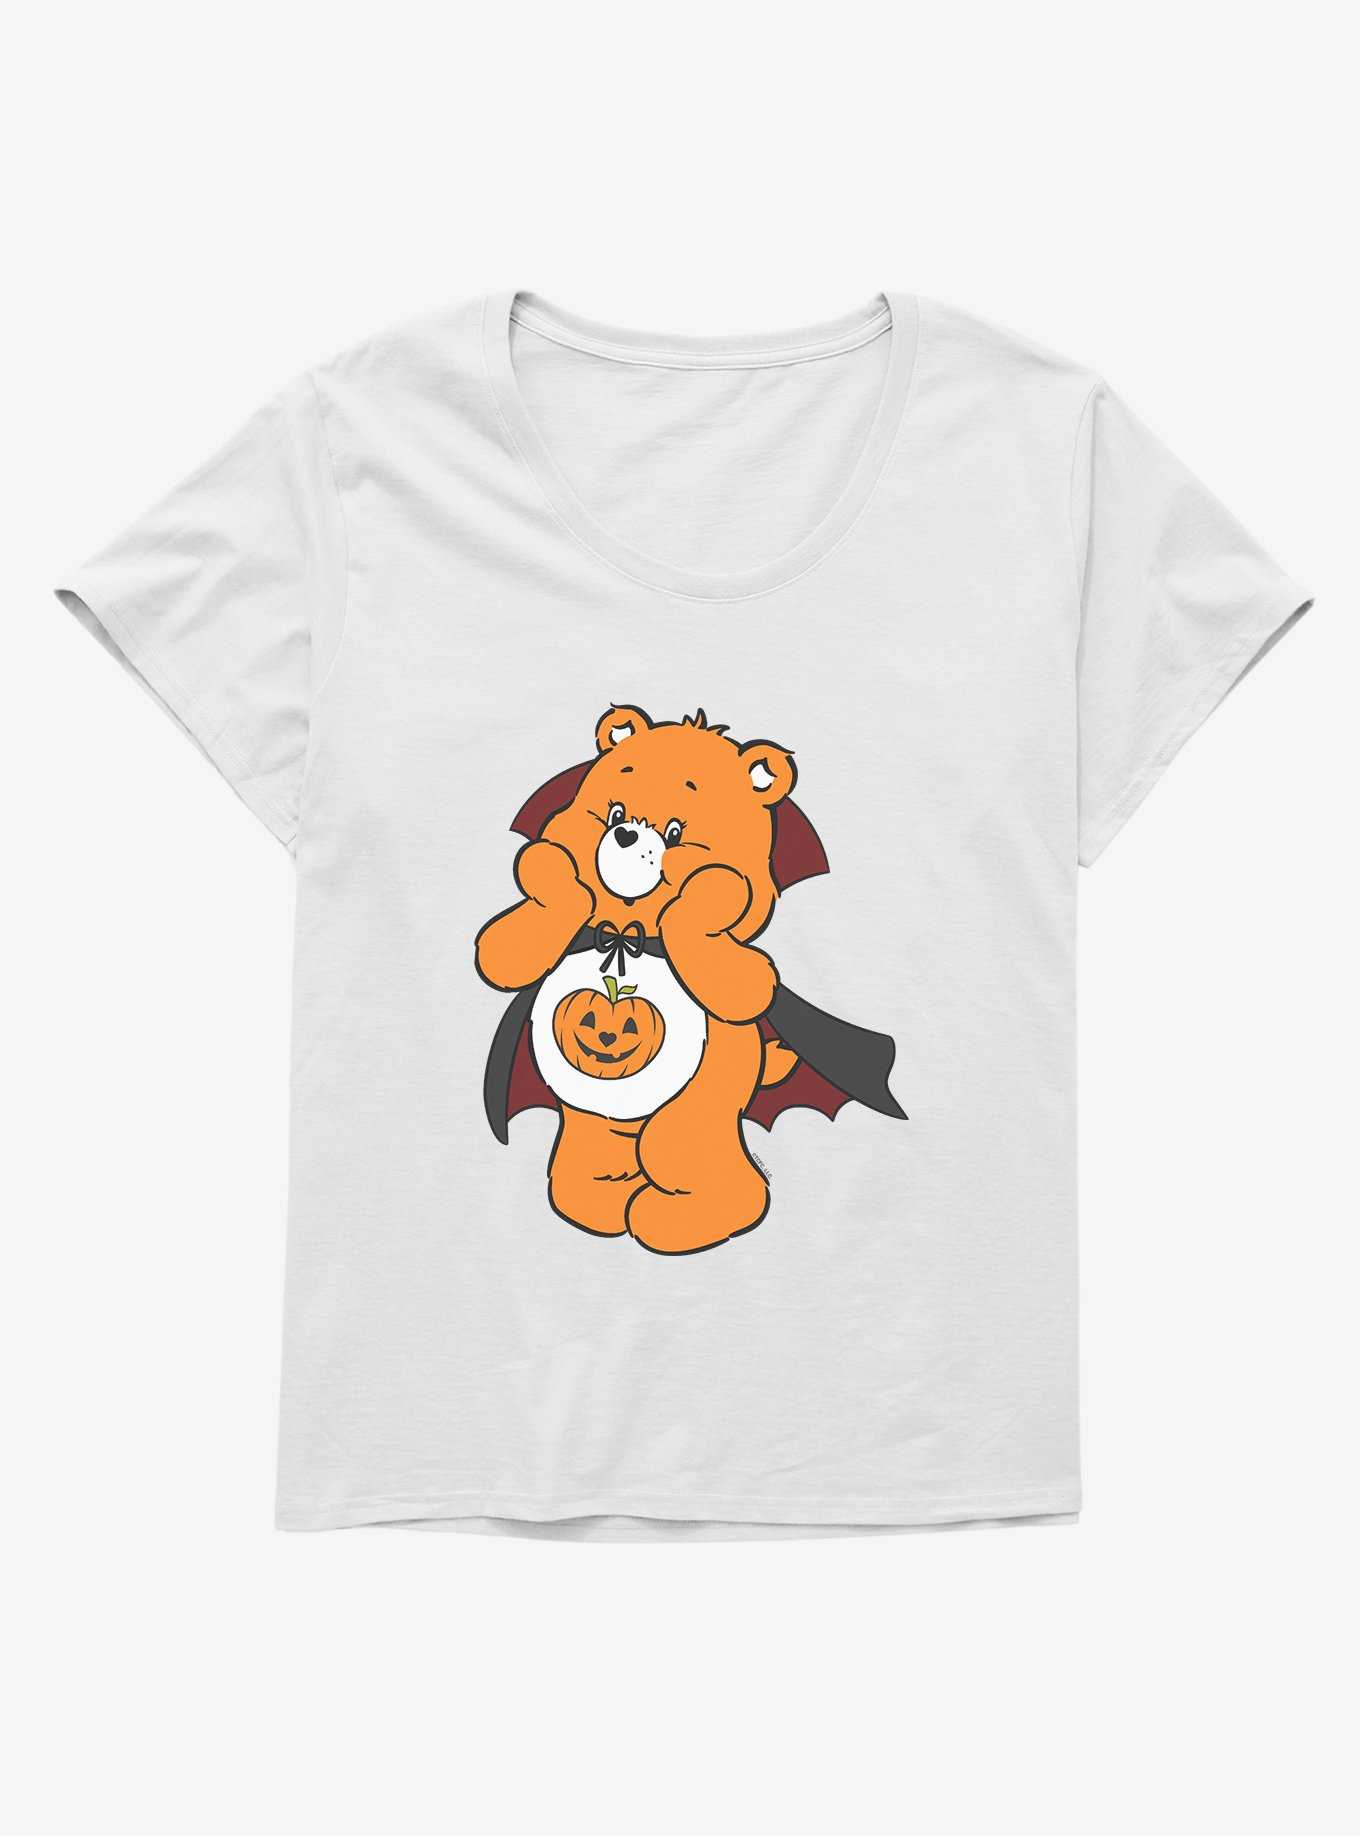 Care Bears Trick Or Sweet Girls T-Shirt Plus Size, WHITE, hi-res